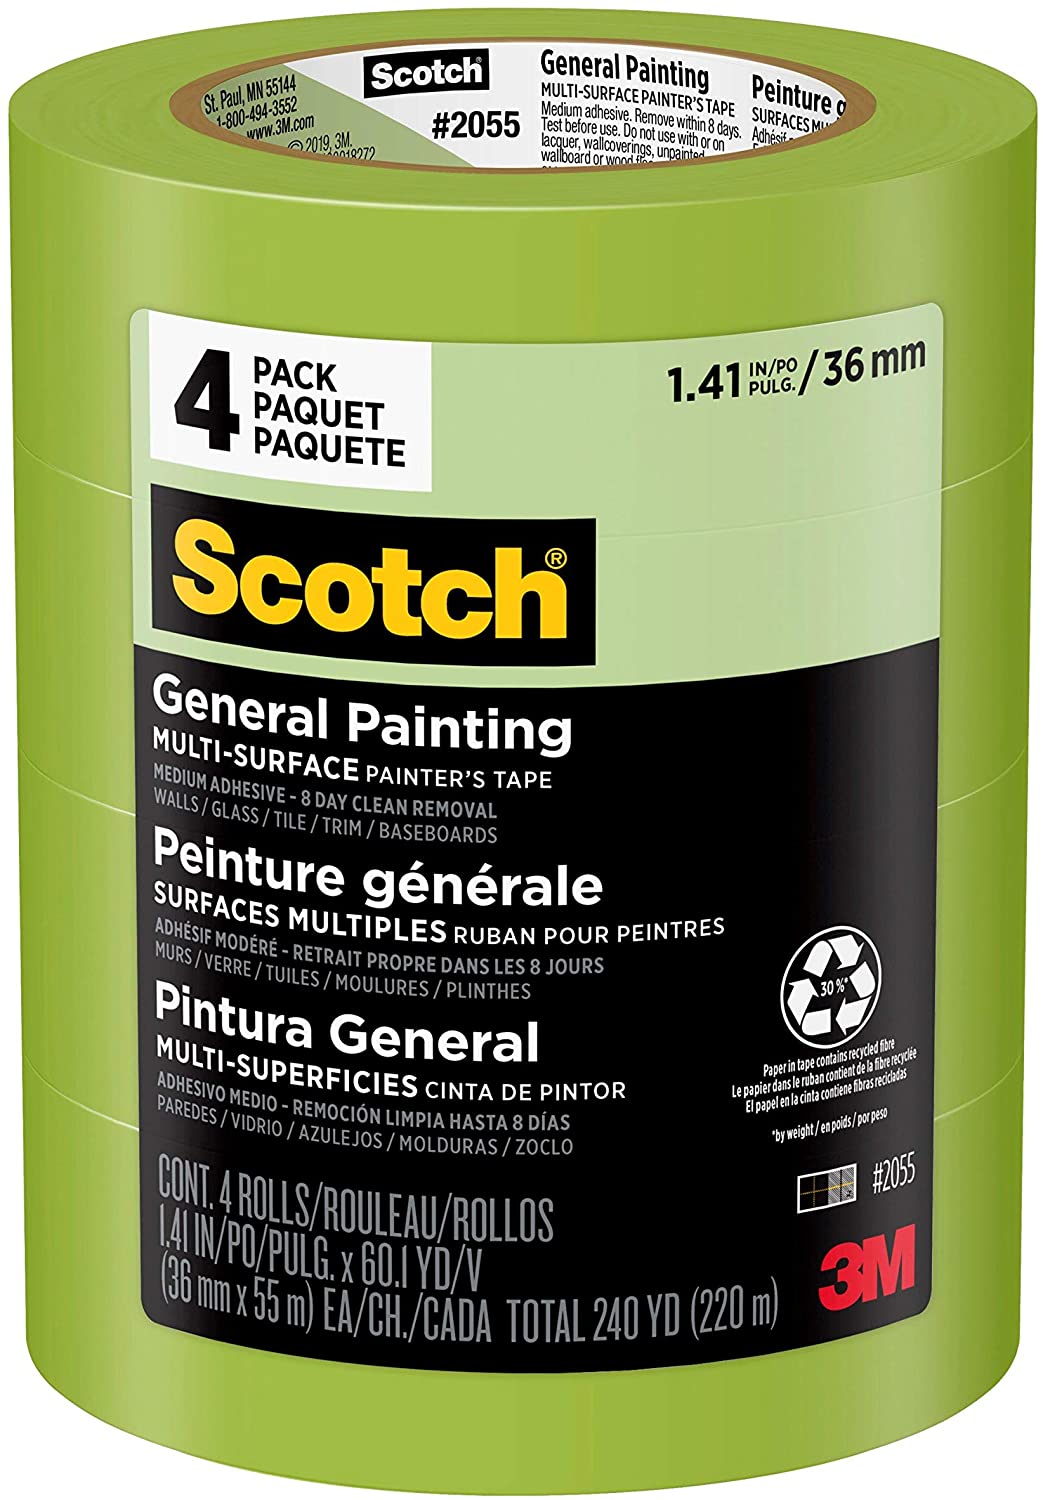 Scotch Painter's Tape, Green Masking Tape for General Painting